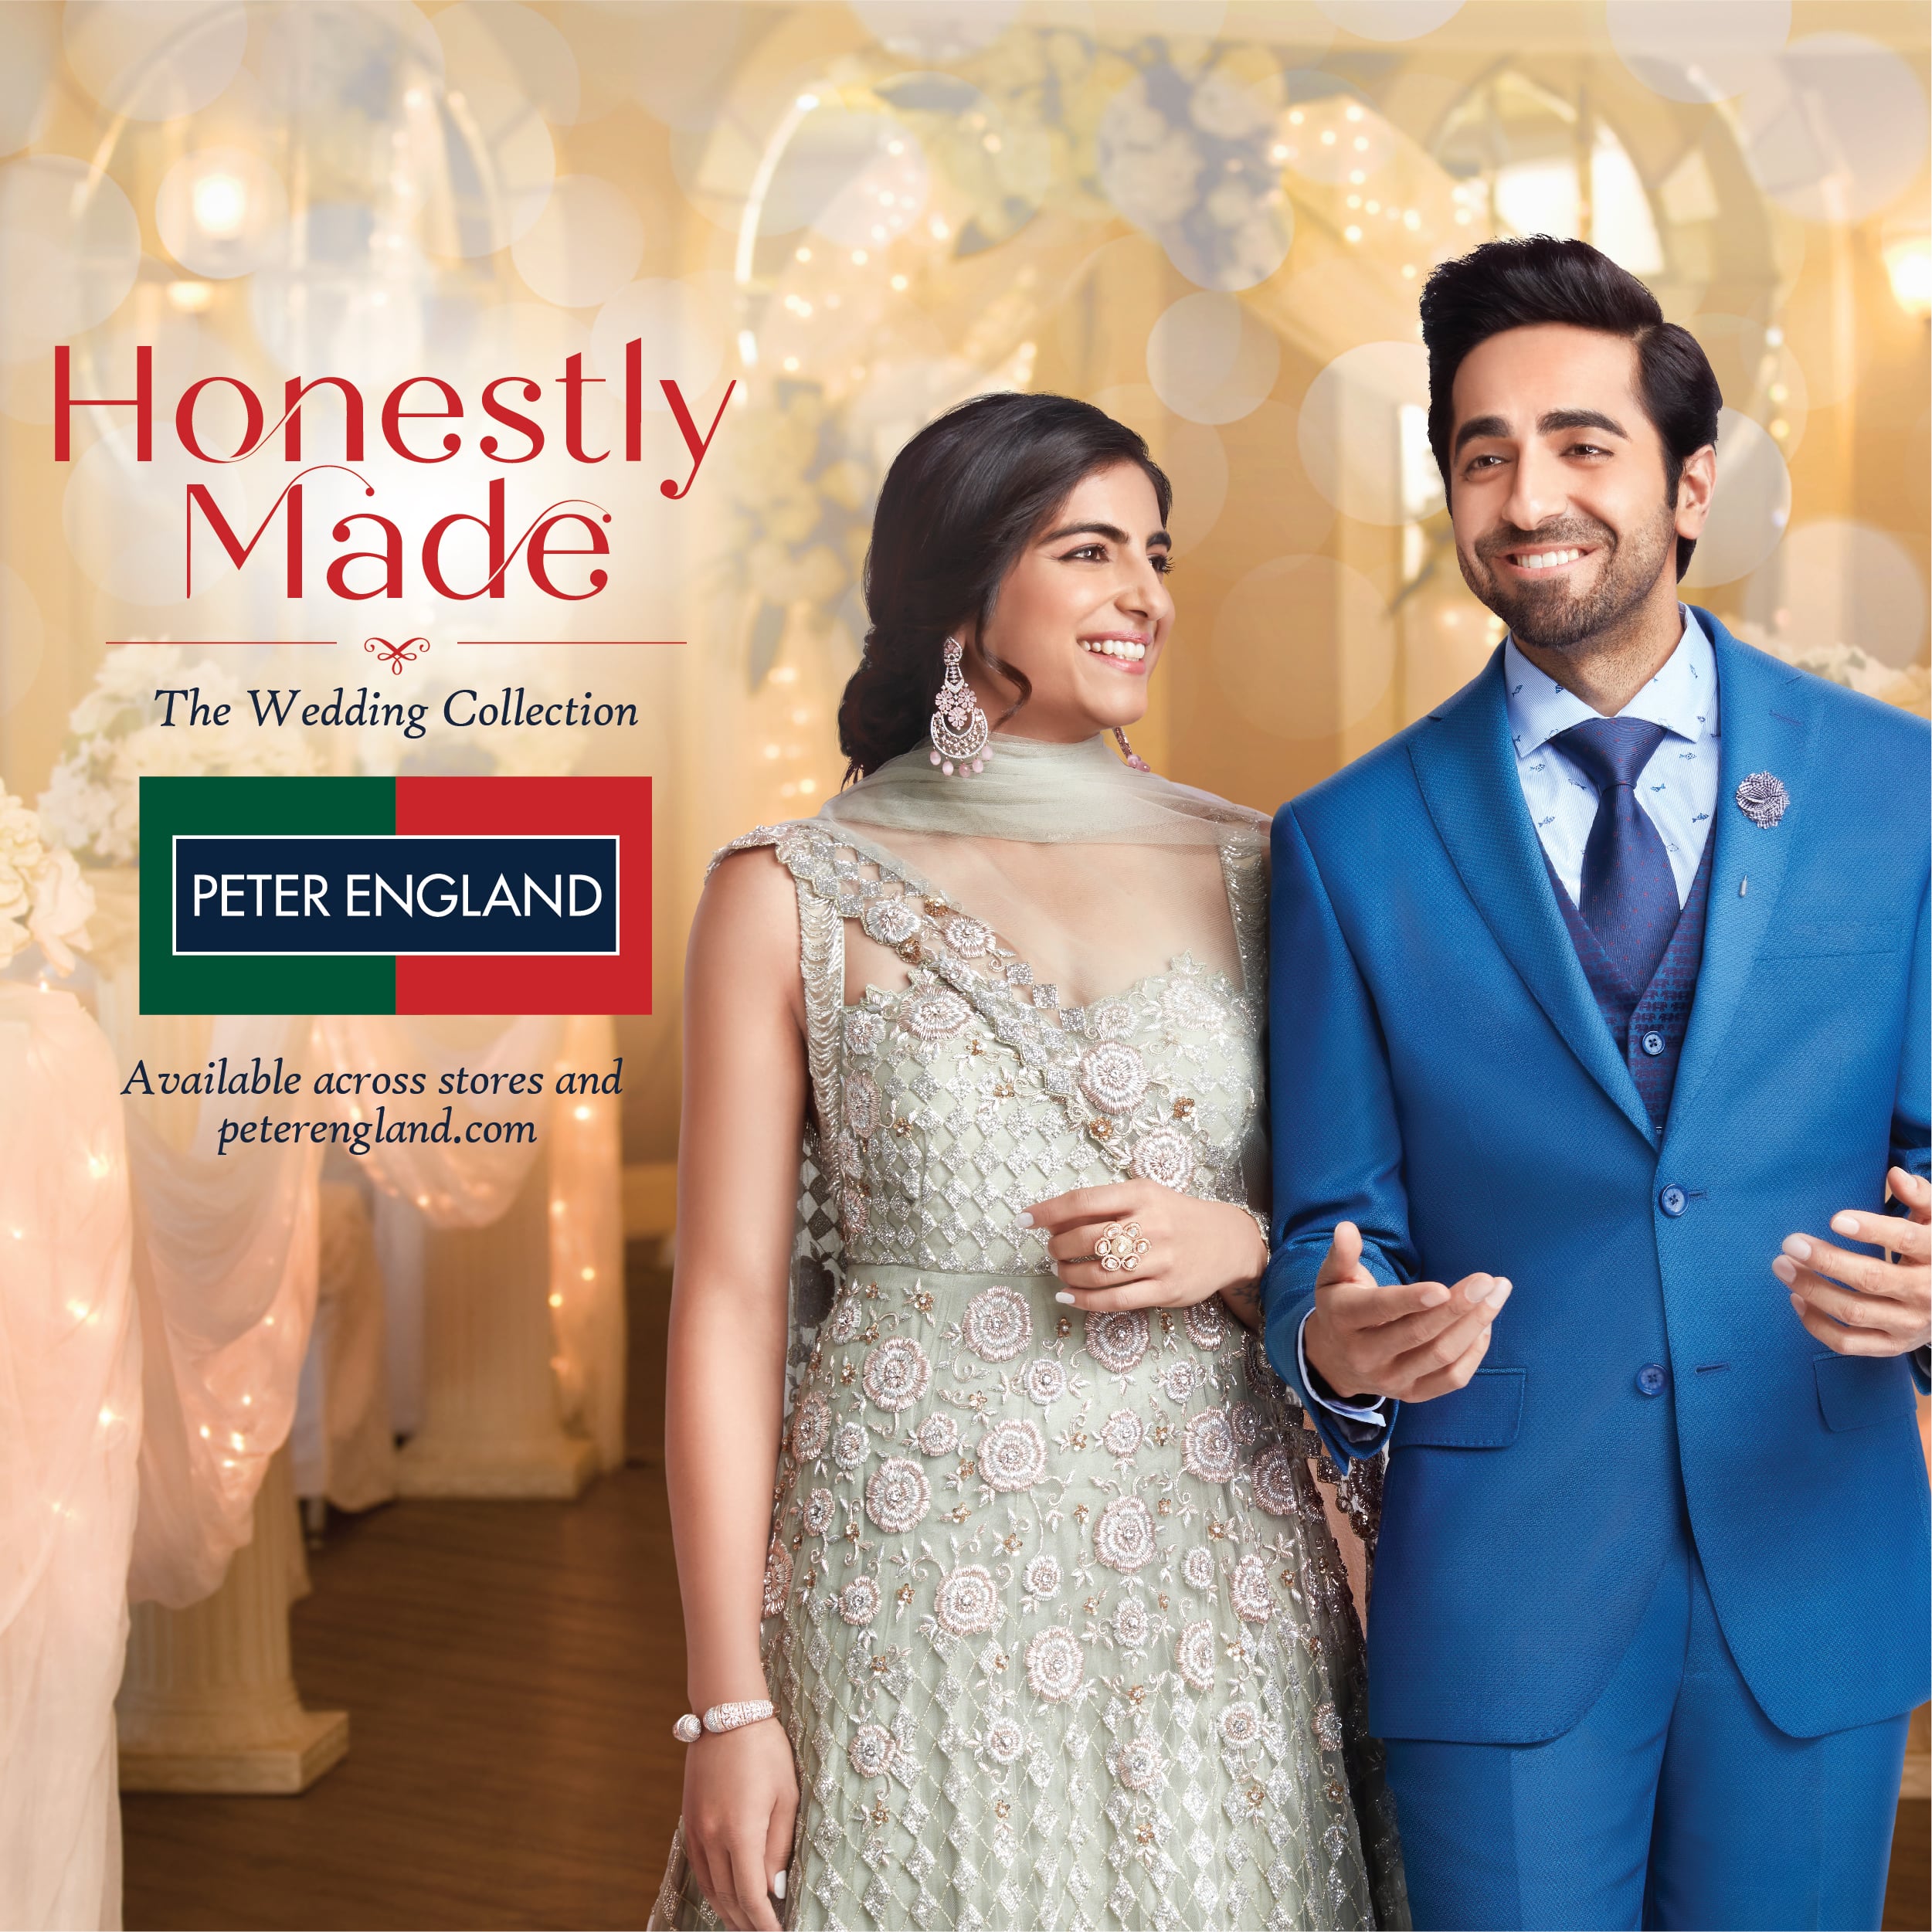 Peter England launches its new wedding range with Honestly Made campaign  for men  Bold Outline  Indias leading Online Lifestyle Fashion  Travel  Magazine